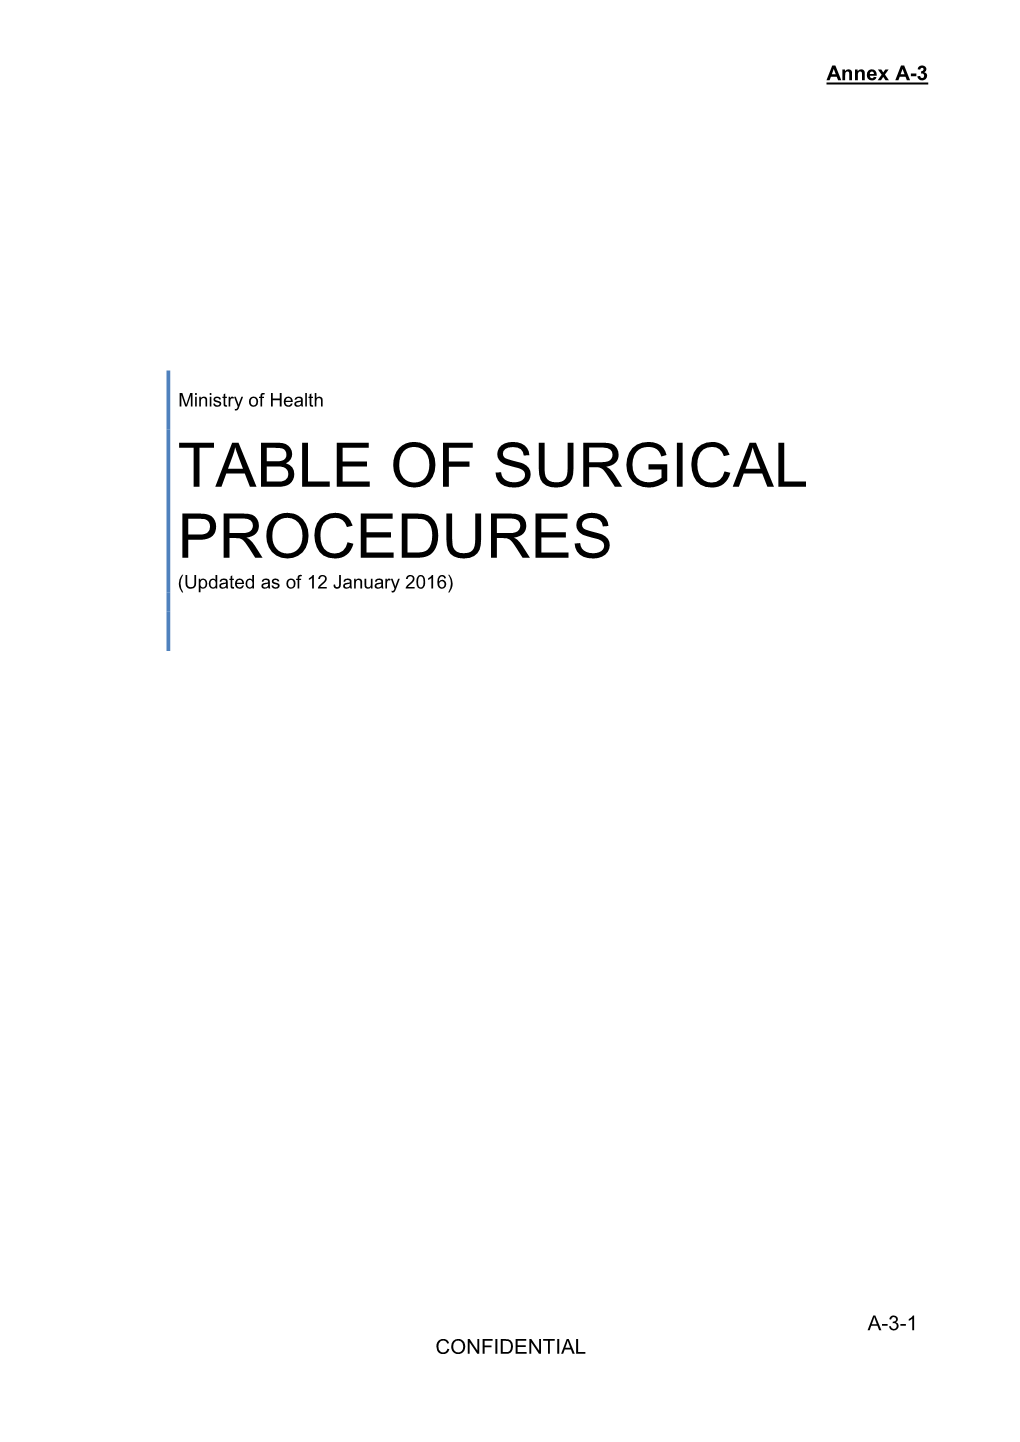 A-3 Table of Surgical Procedures (TOSP)